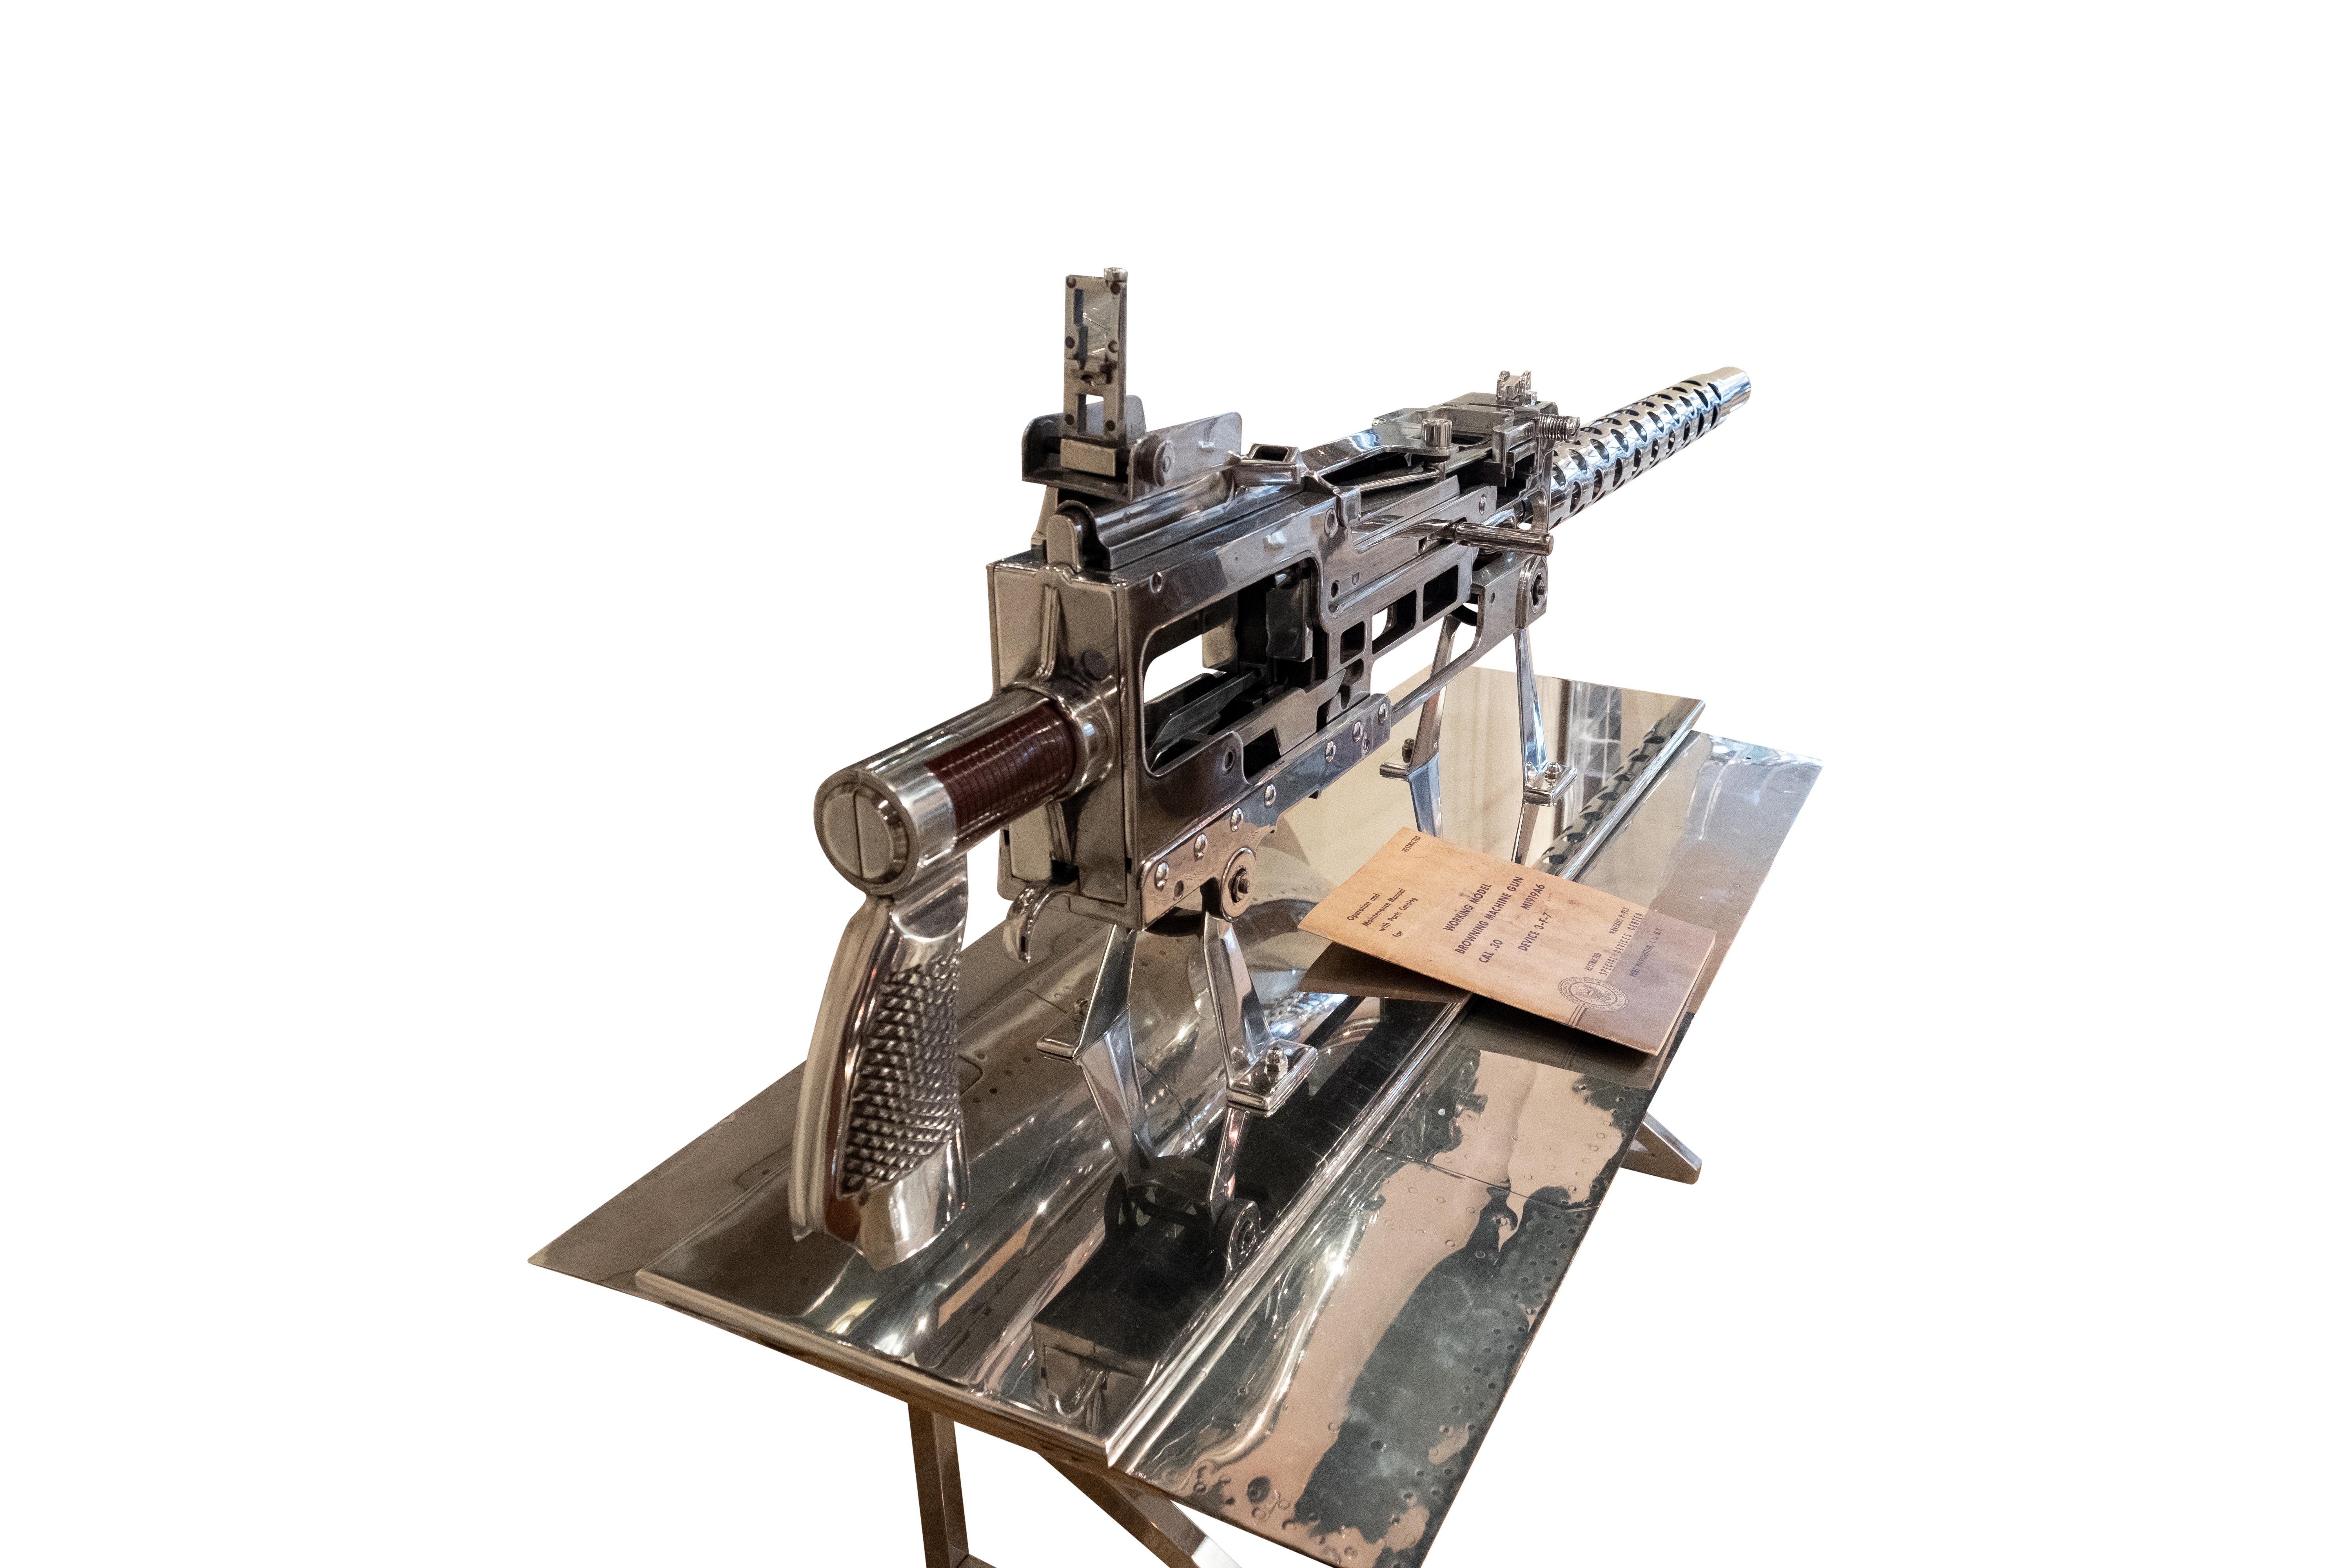 American WWII Training Model of a Browning M1919 .30 Caliber Machine Gun For Sale